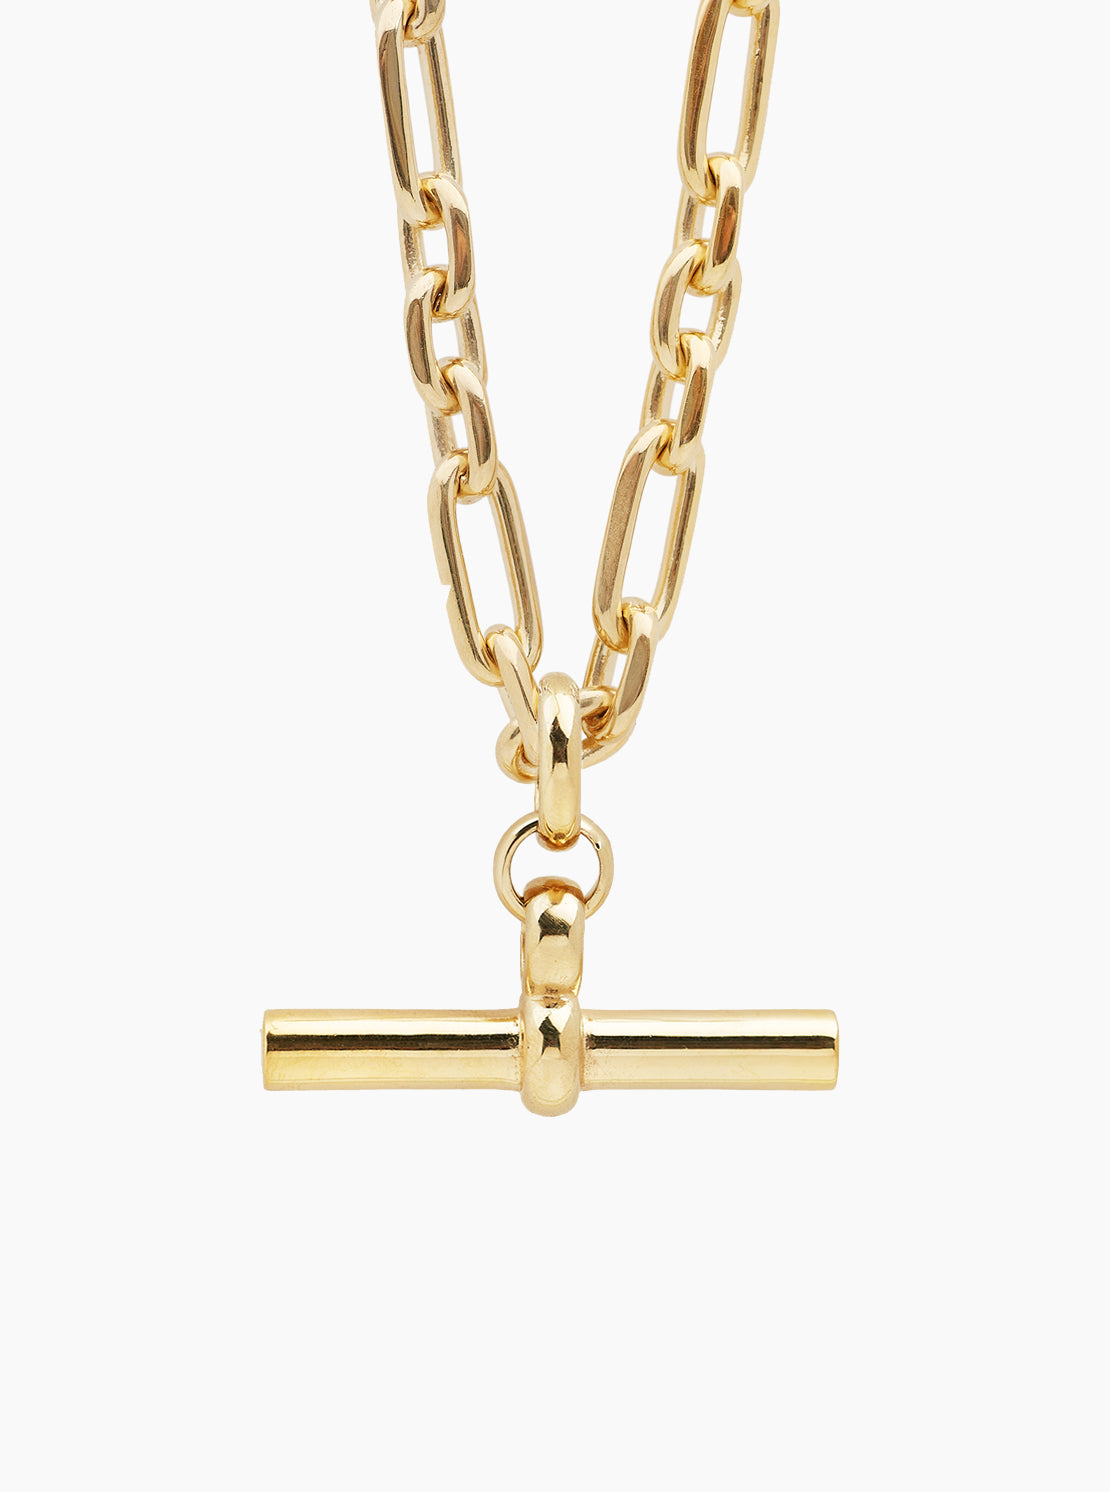 Giant gold T bar watch chain necklace